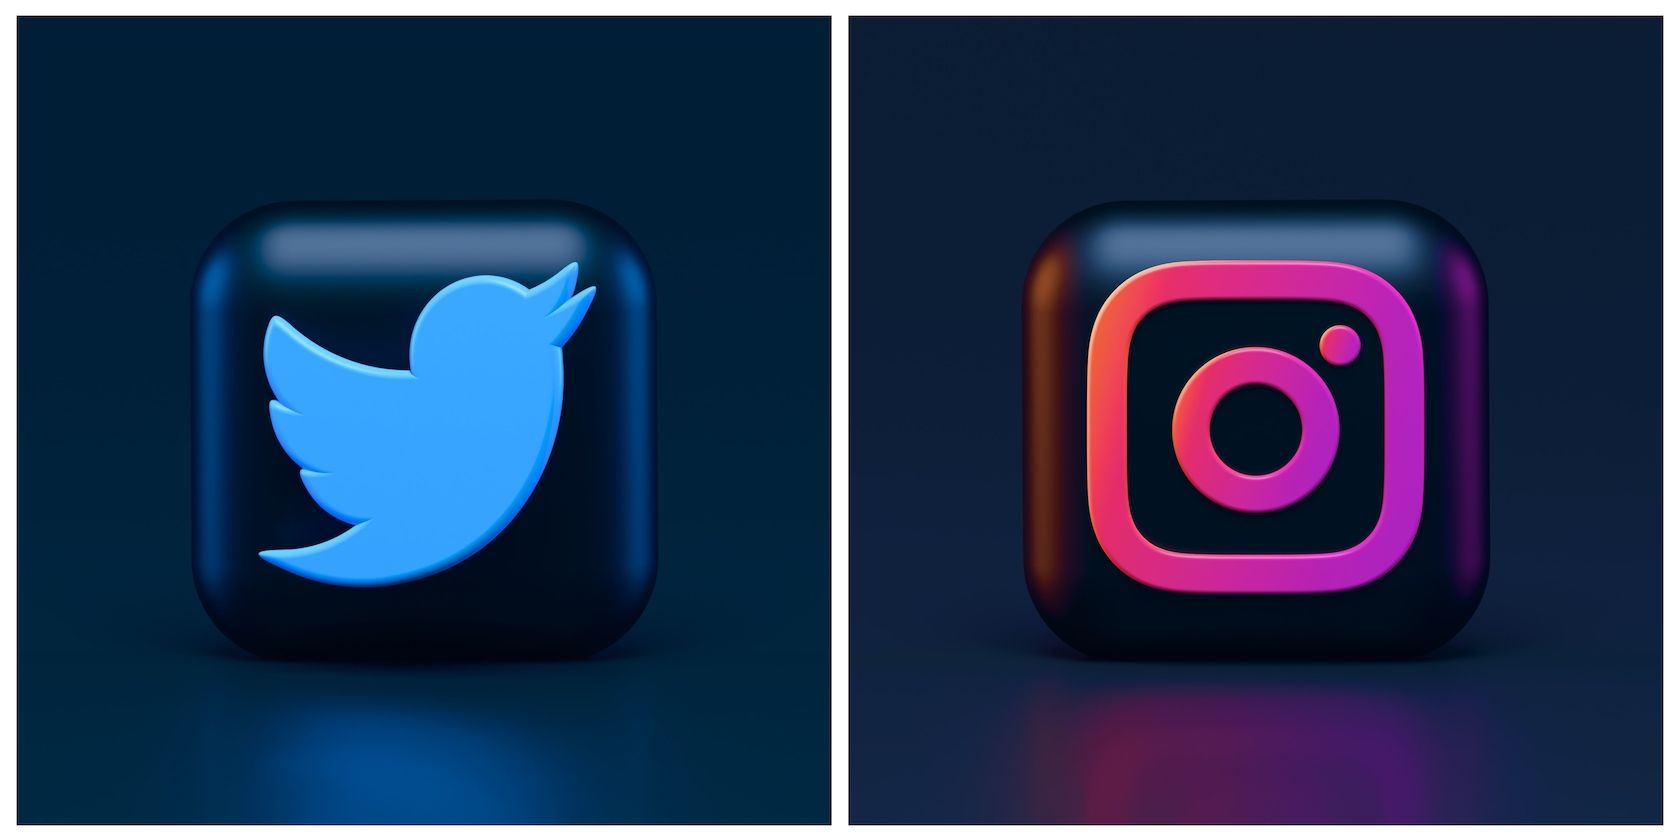 The 3D versions of the Twitter and Instagram icons